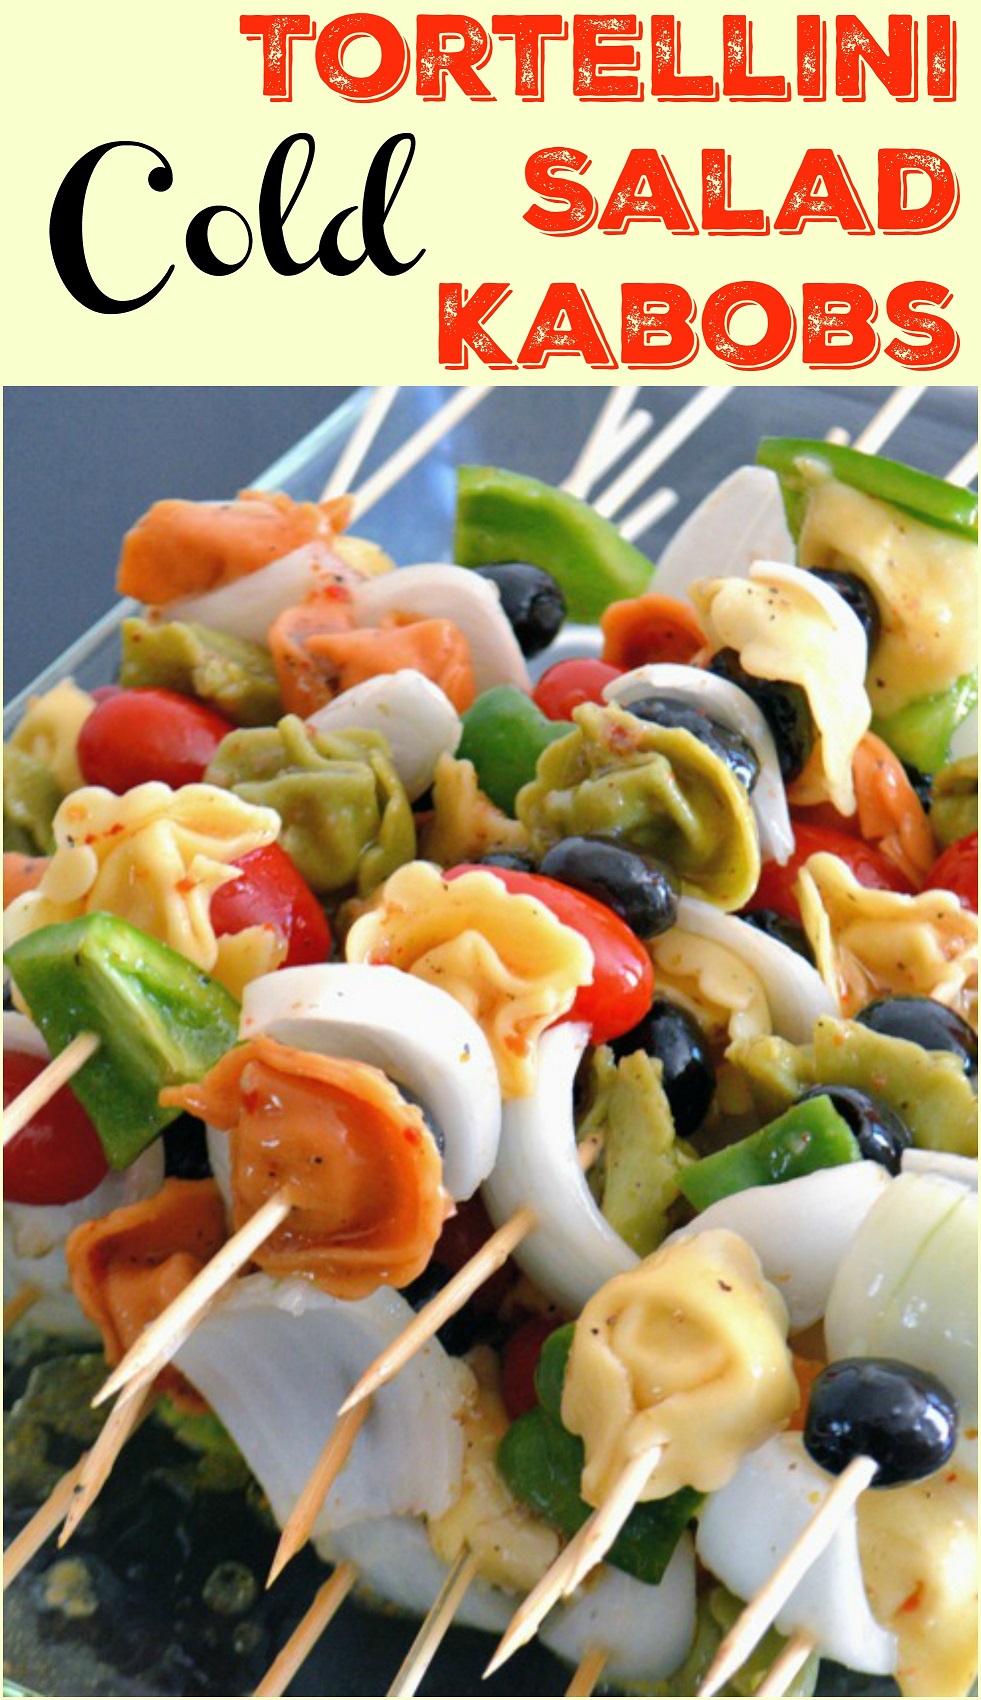 Cold Tortellini Salad Kabobs Recipe- make ahead for parties and use the leftovers in a salad. Cold Tortellini Salad Kabobs are the perfect easy appetizer! 